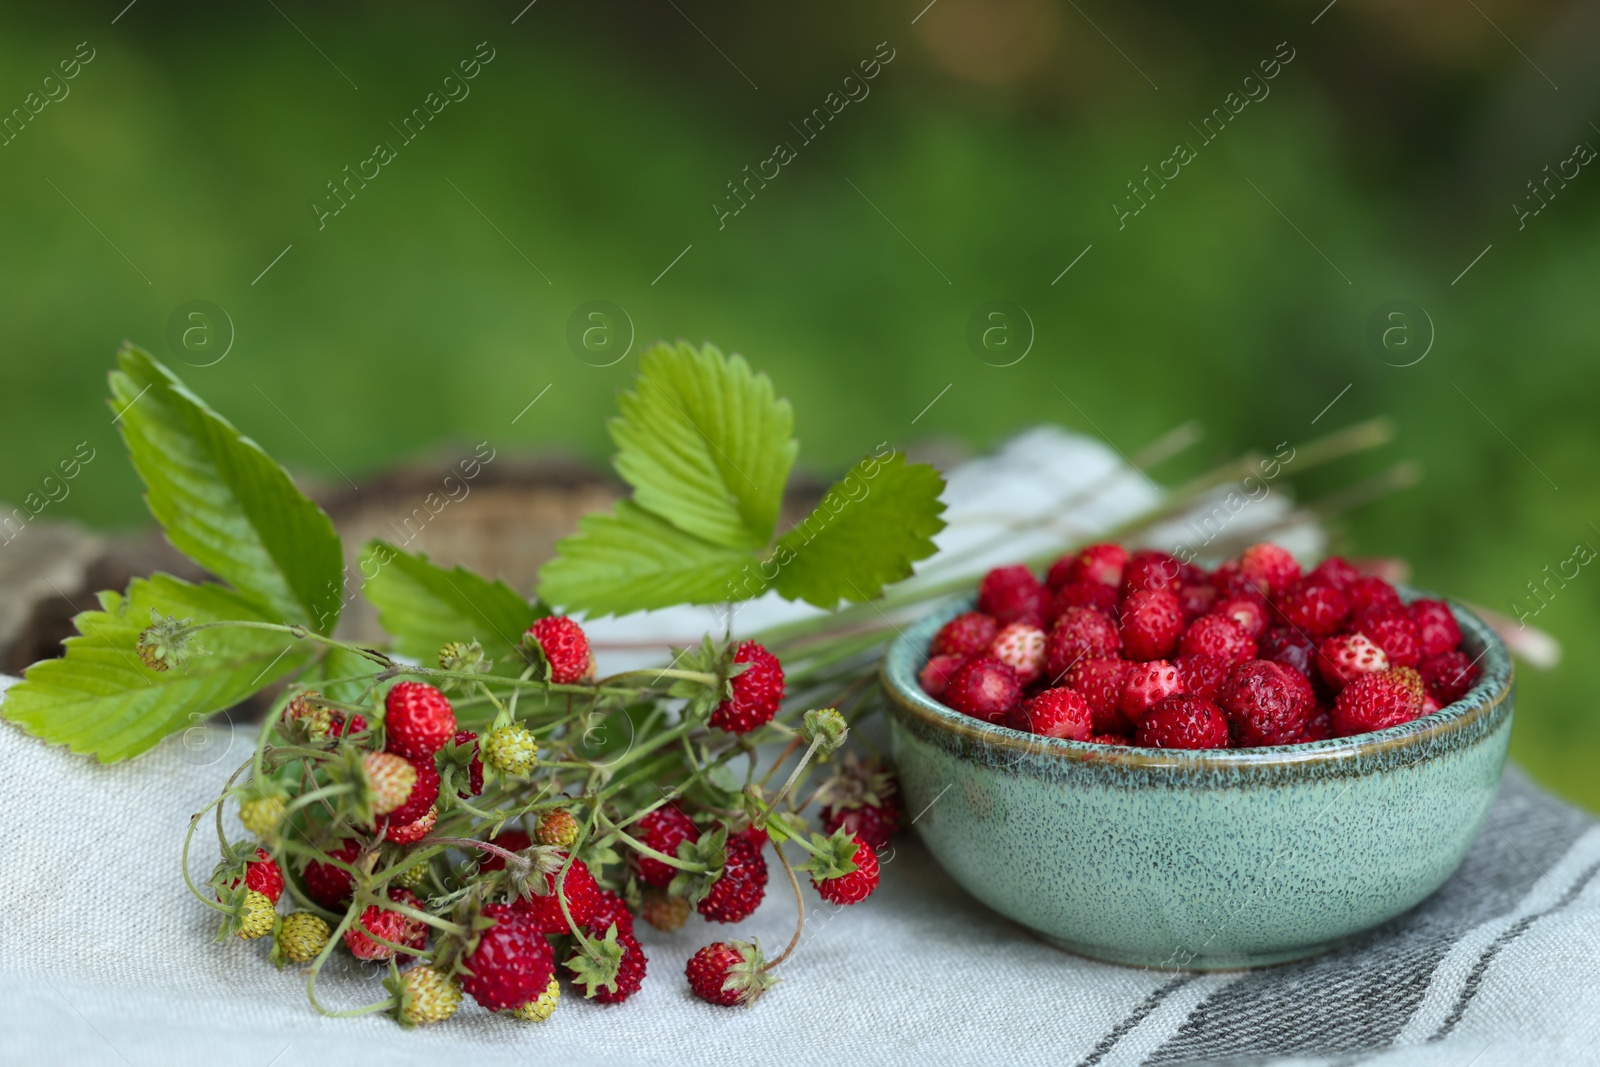 Photo of Bowl and tasty wild strawberries on cloth against blurred background. Space for text